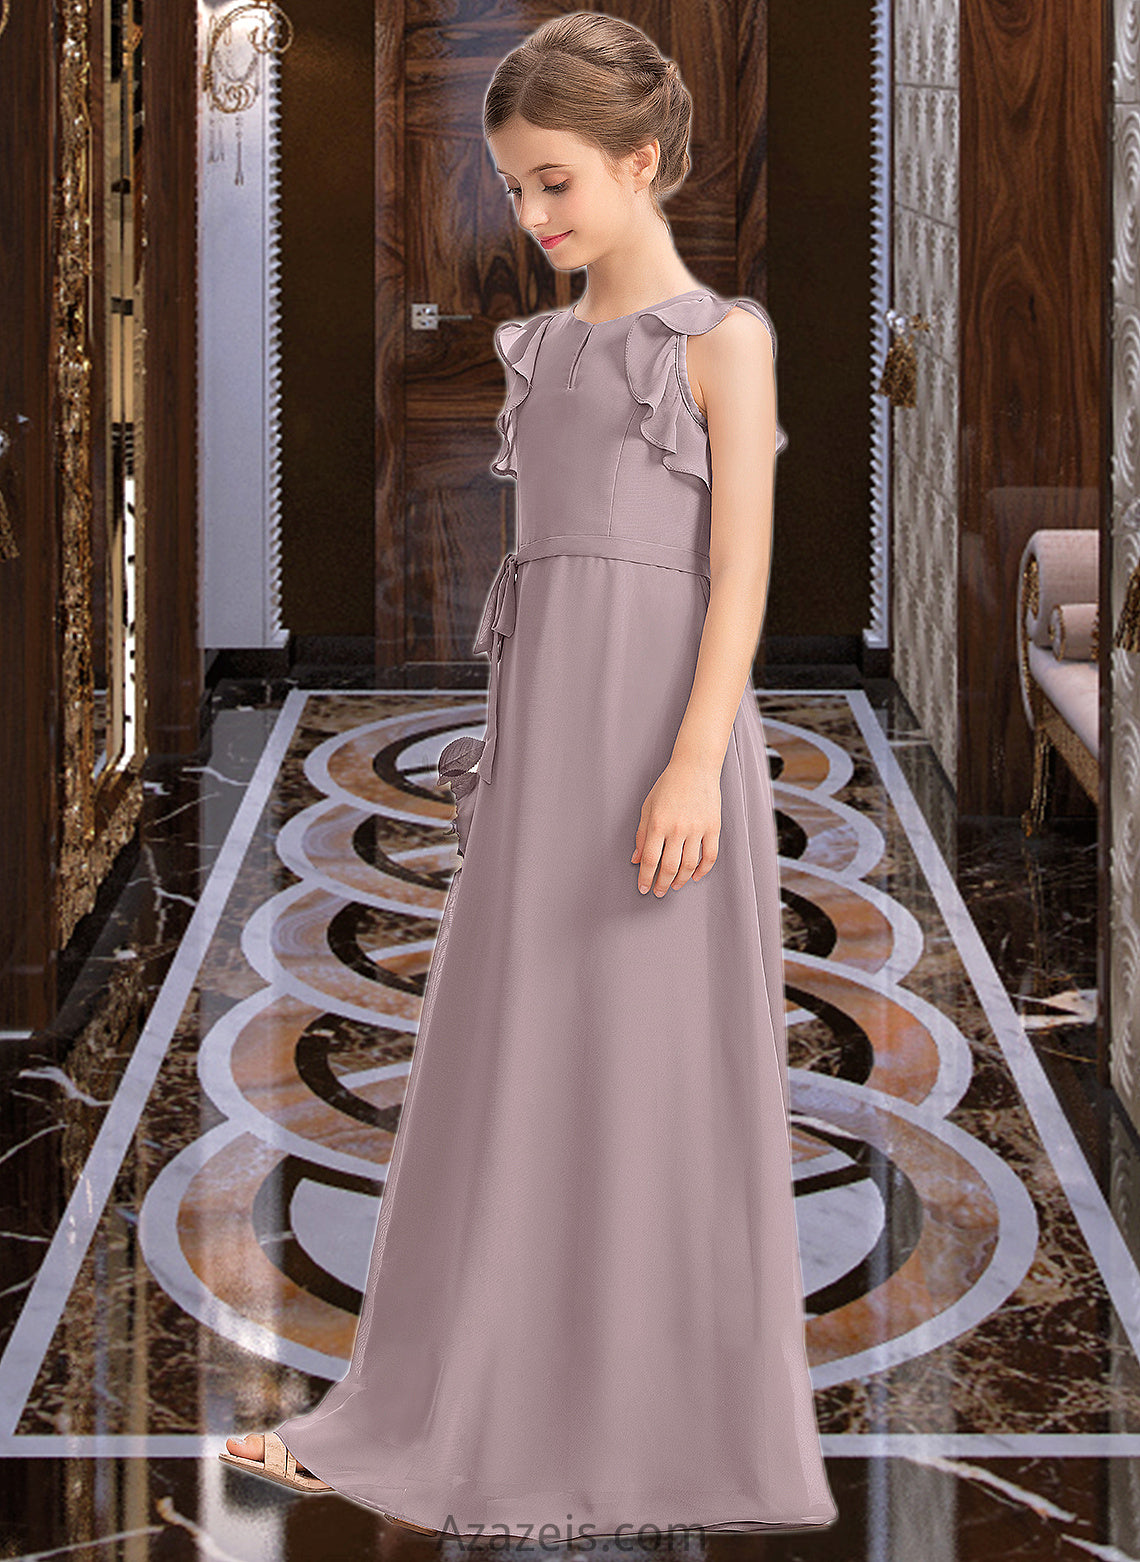 Meredith A-Line Scoop Neck Floor-Length Chiffon Junior Bridesmaid Dress With Bow(s) Cascading Ruffles DFP0013659